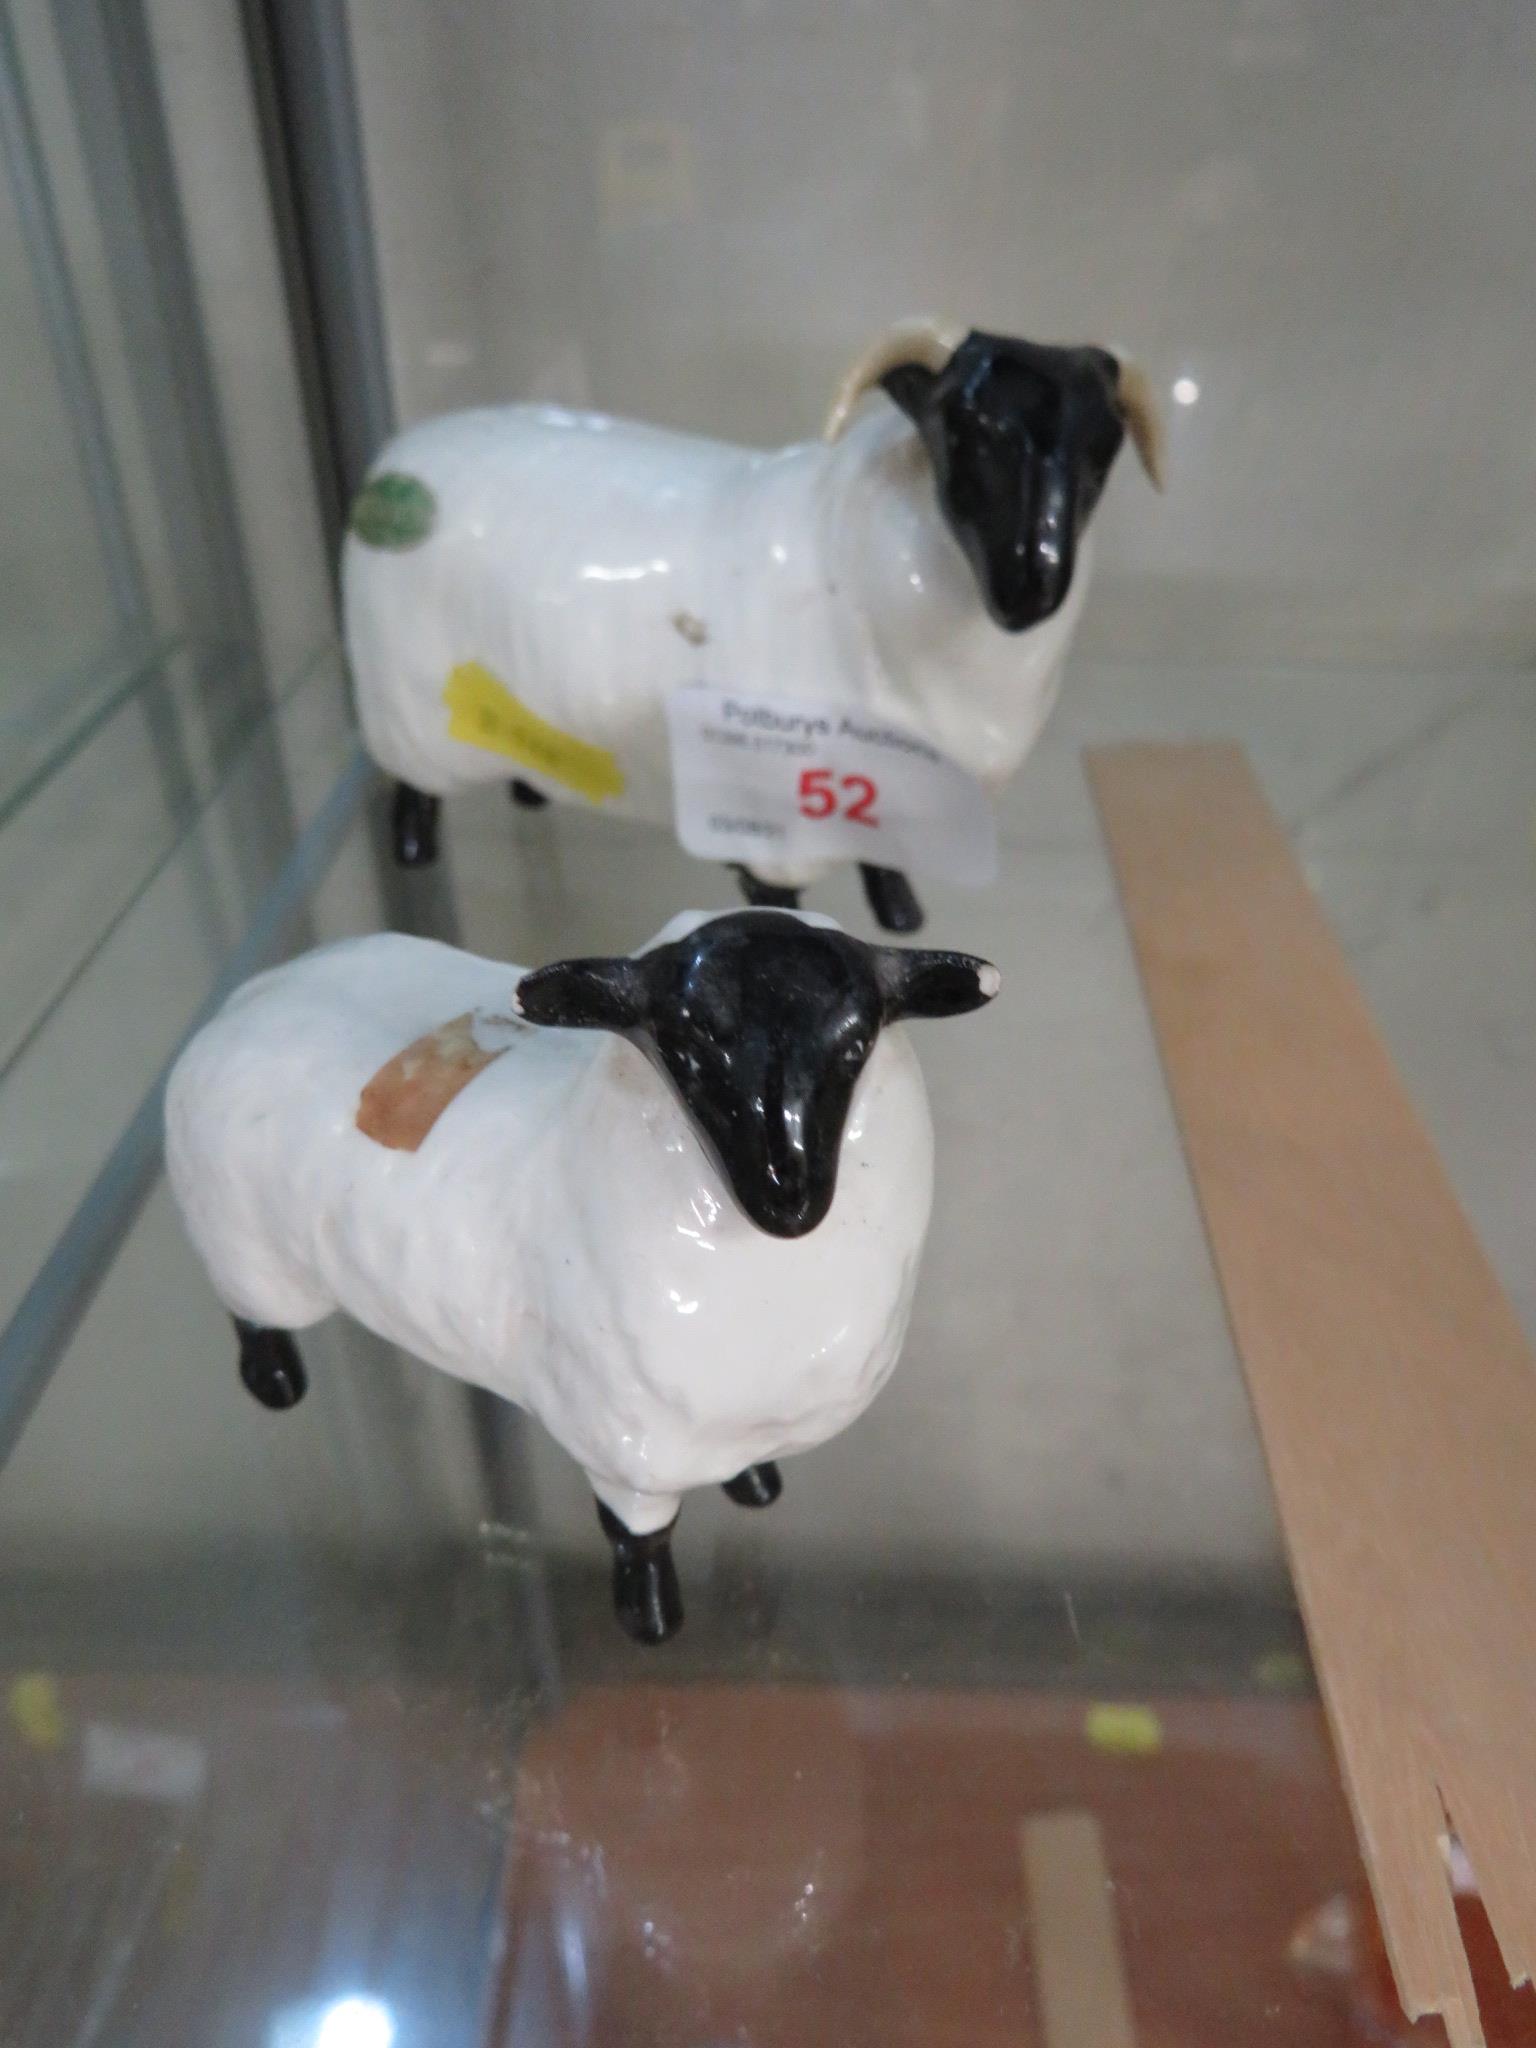 BESWICK FIGURE OF A HORNED SHEEP TOGETHER WITH LAMB. (AF)